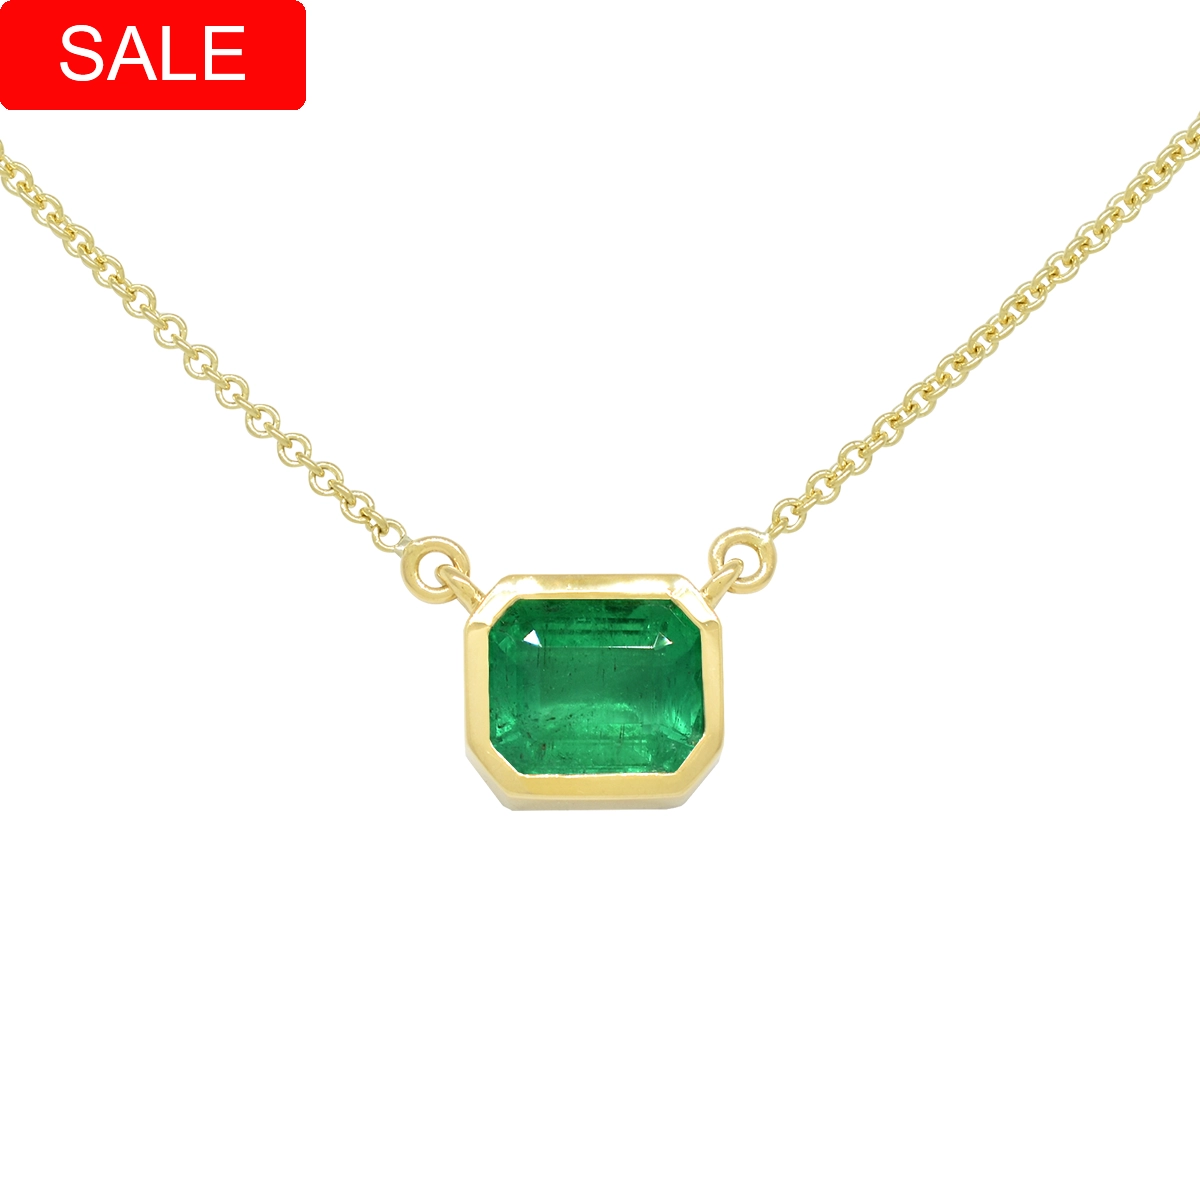 One Carat Emerald Cut Natural Colombian Emerald Necklace in 18K Gold Bezel Setting